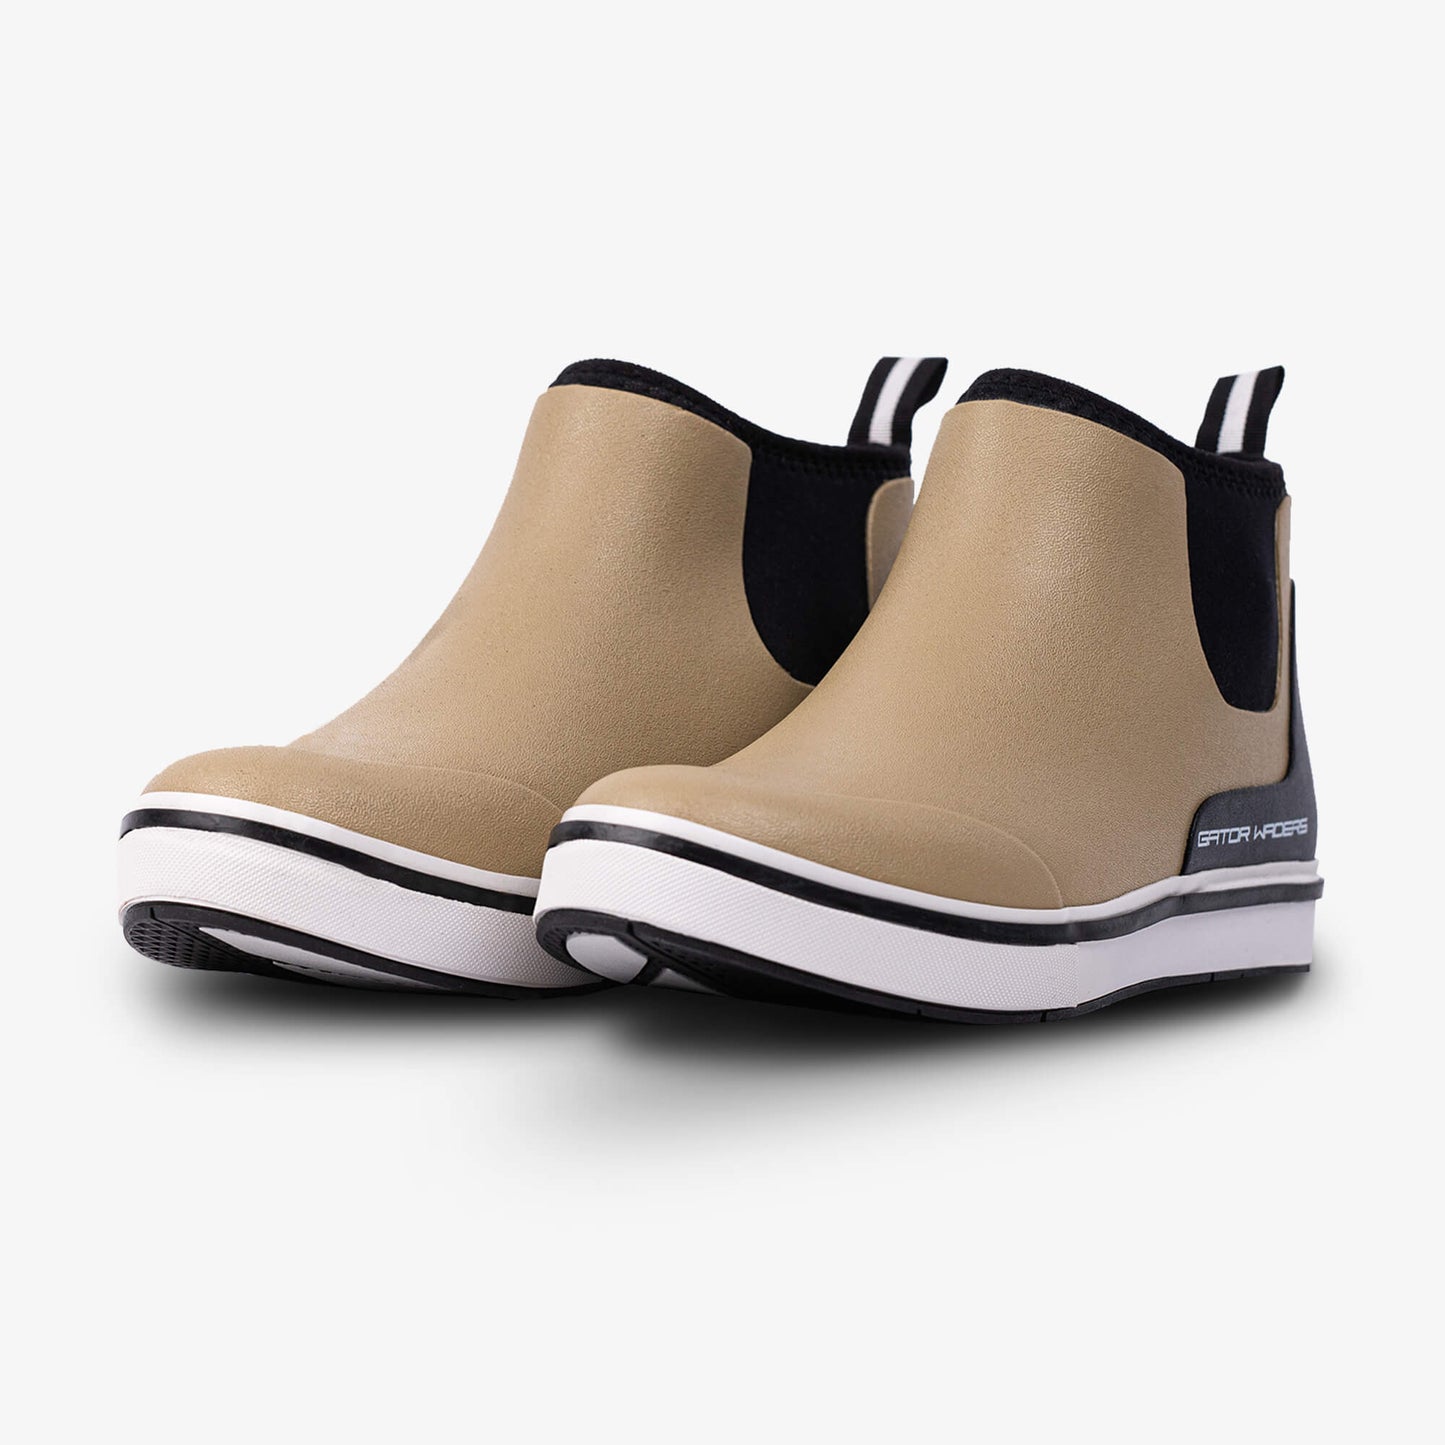 Deck Boots | Mens - Desert Storm by Gator Waders